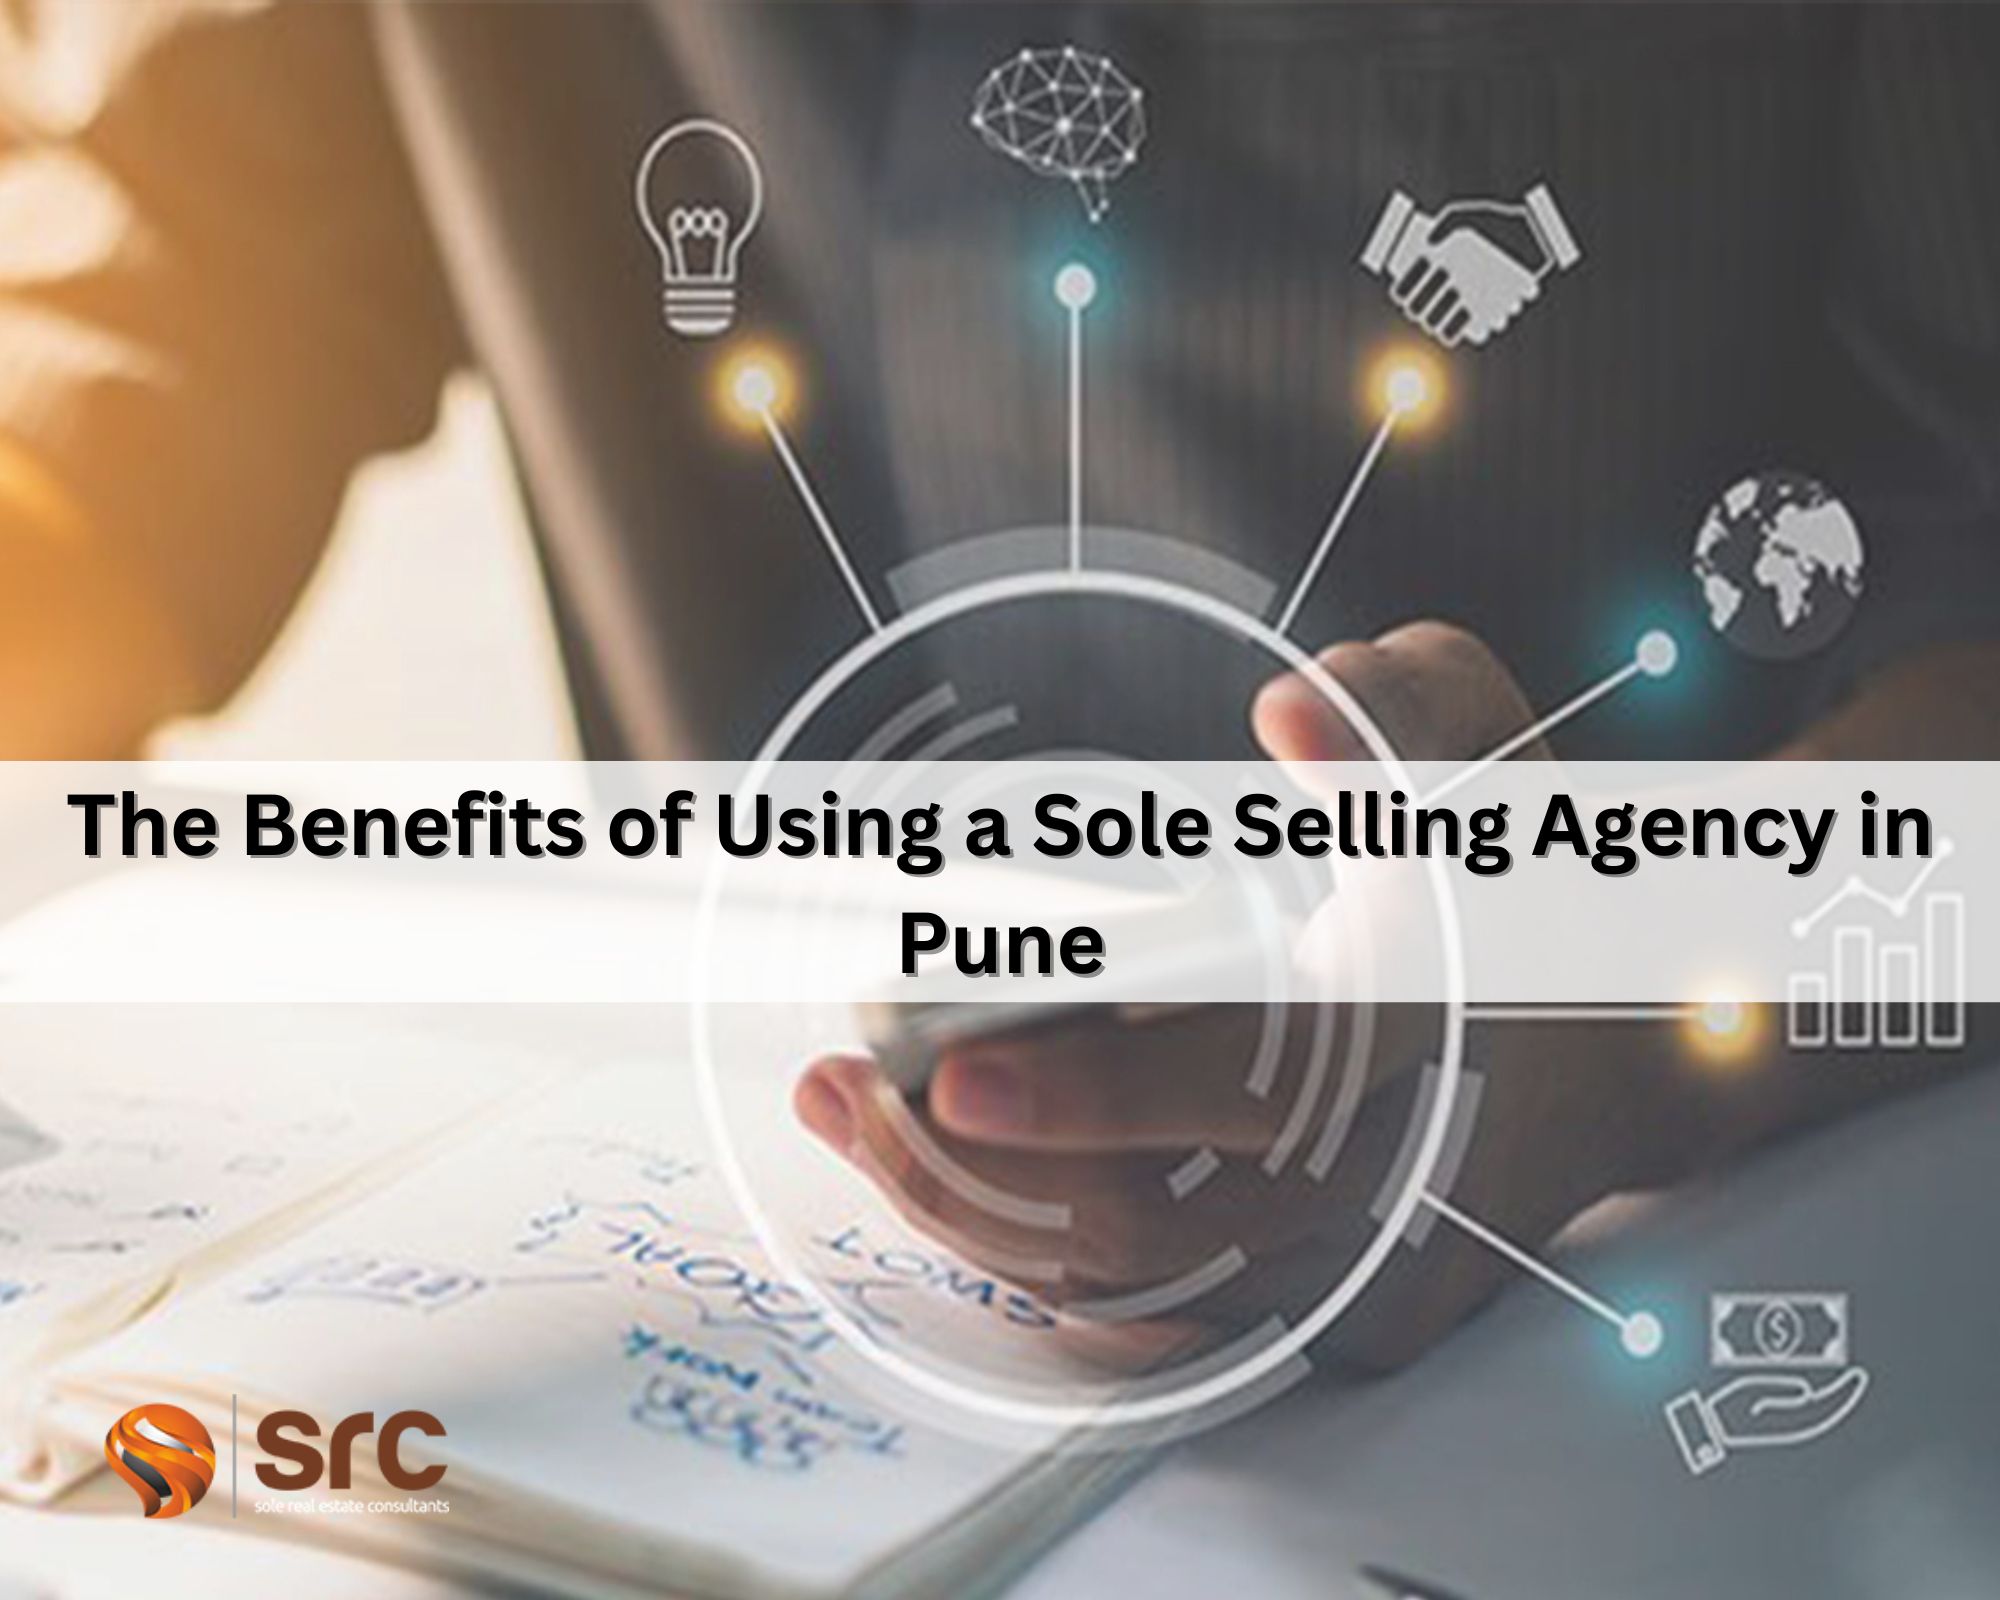 The Benefits of Using a Sole Selling Agency in Pune